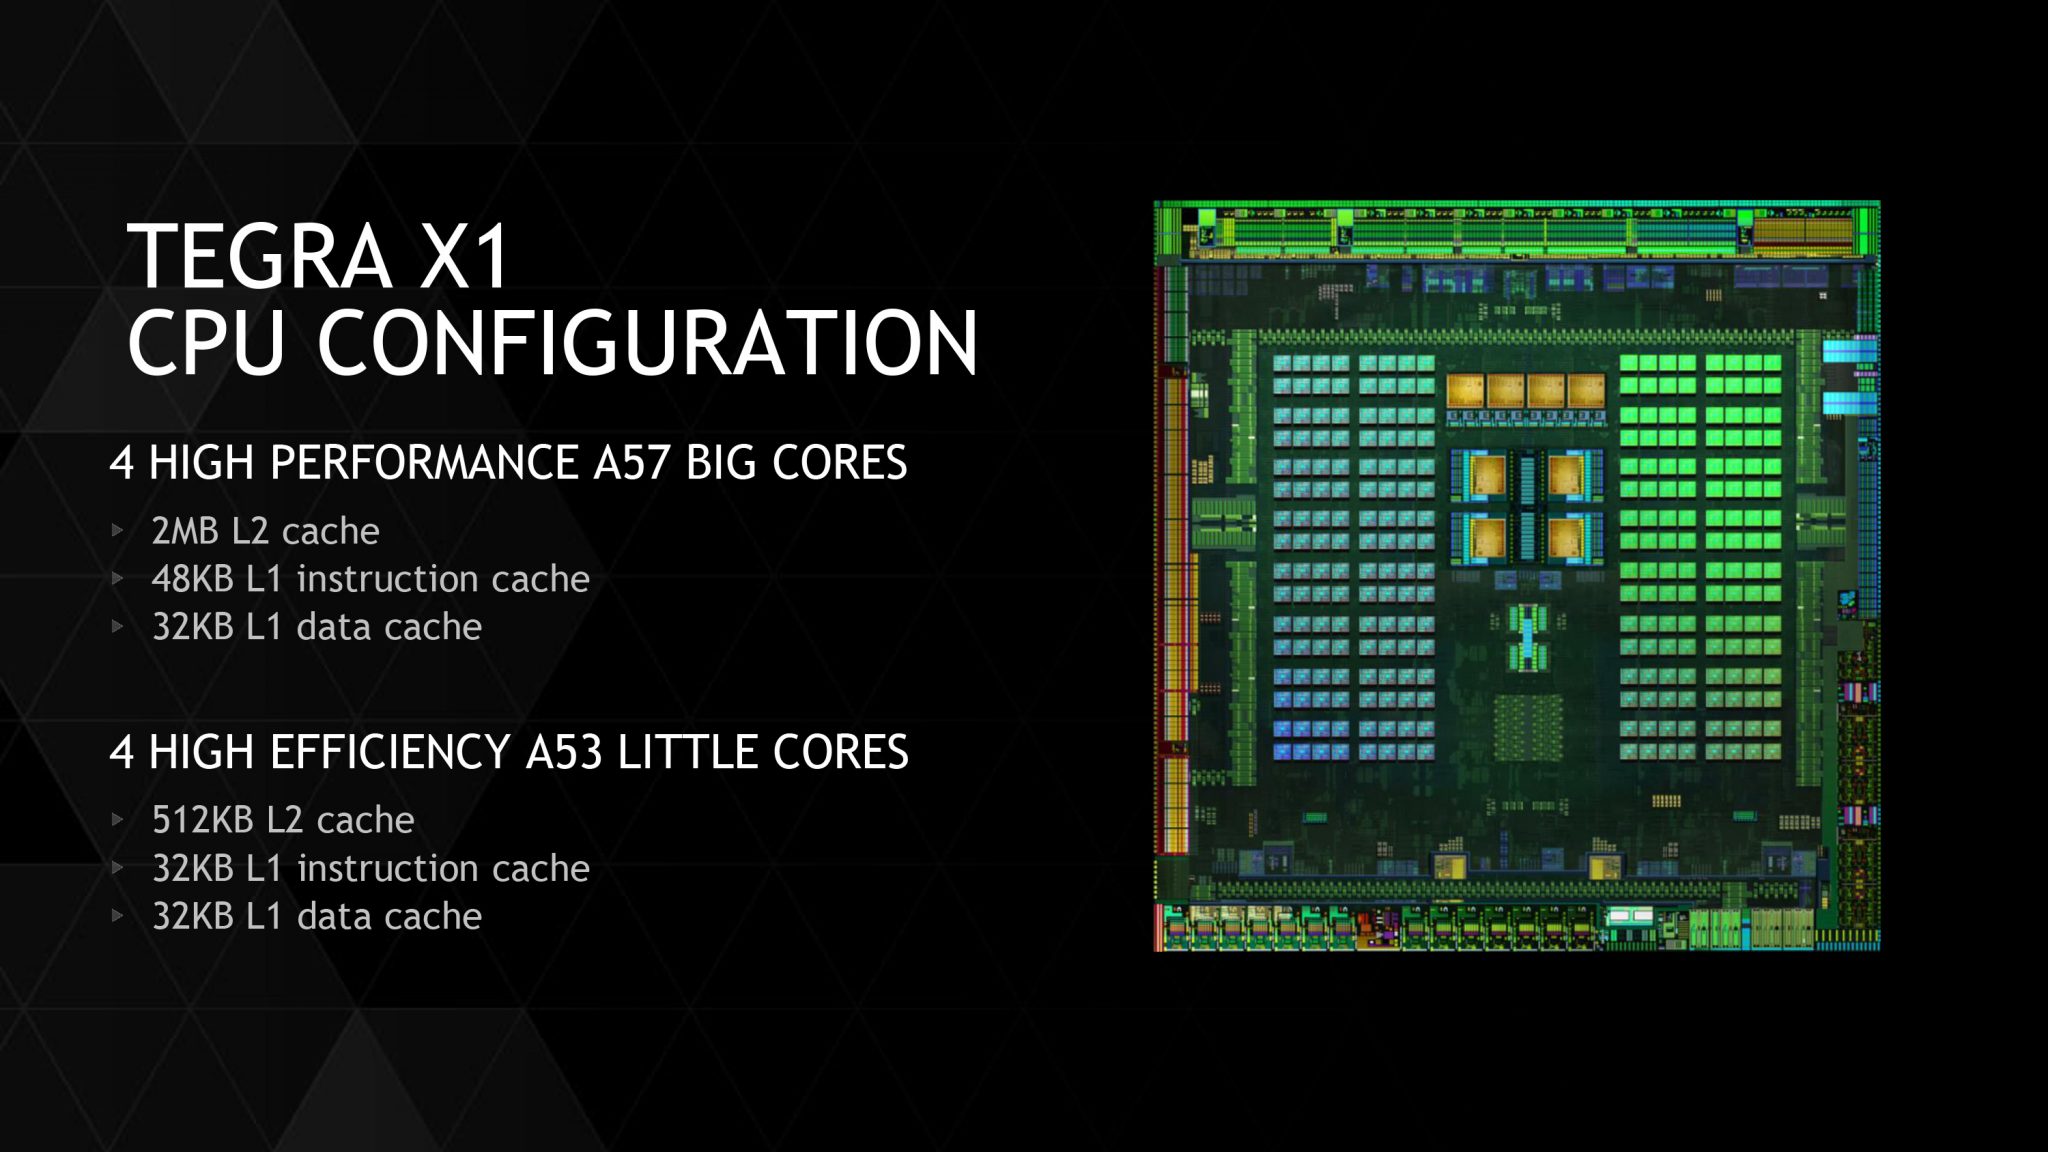 NVIDIA Tegra X1 Maxwell CPU - NVIDIA unveils the new Tegra X1 chip with Twice the power of the Tegra K1